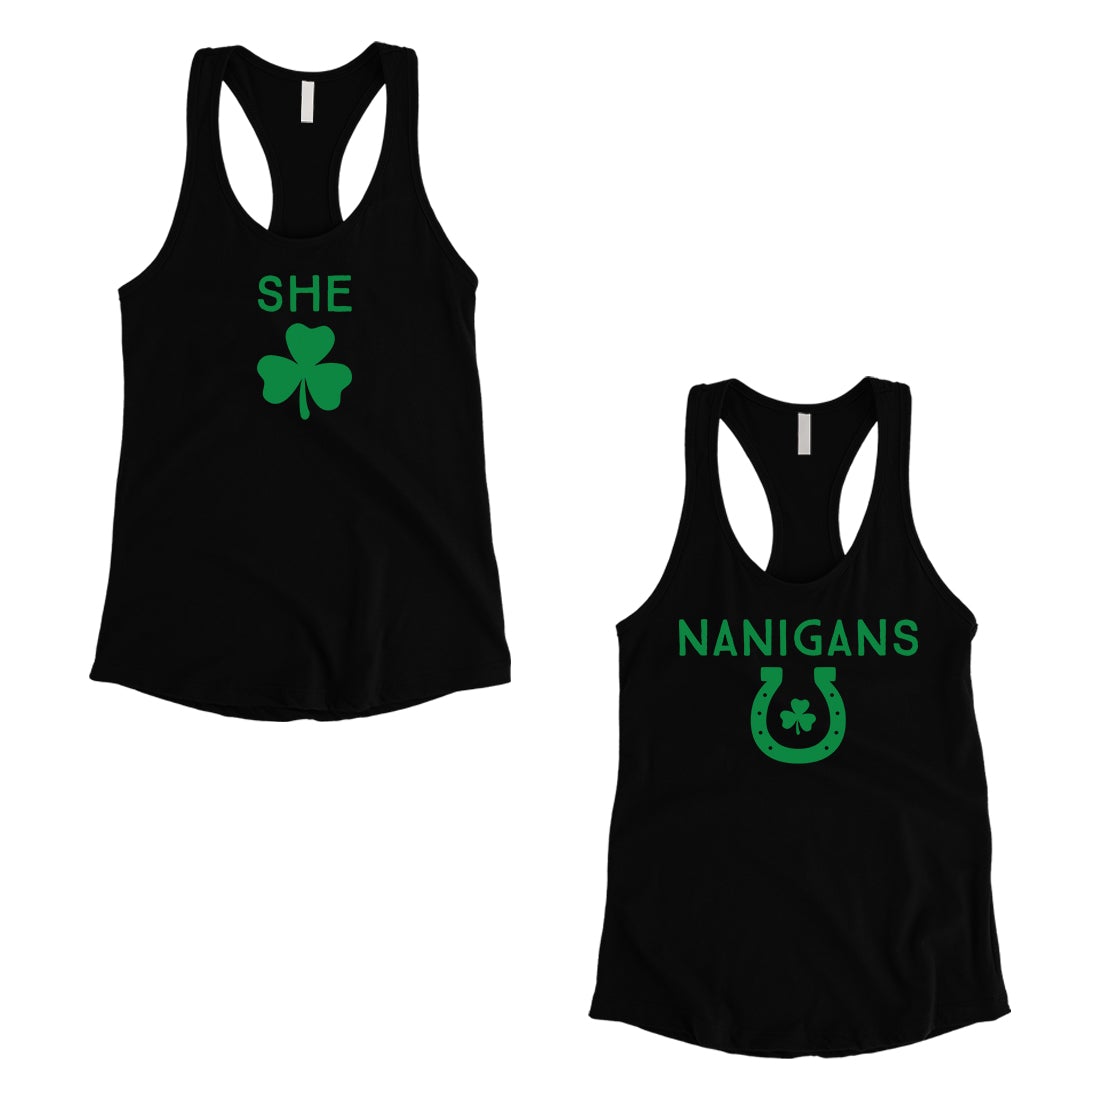 Shenanigans Womens St Patrick's Day Matching Tank Tops BFF Gifts Black